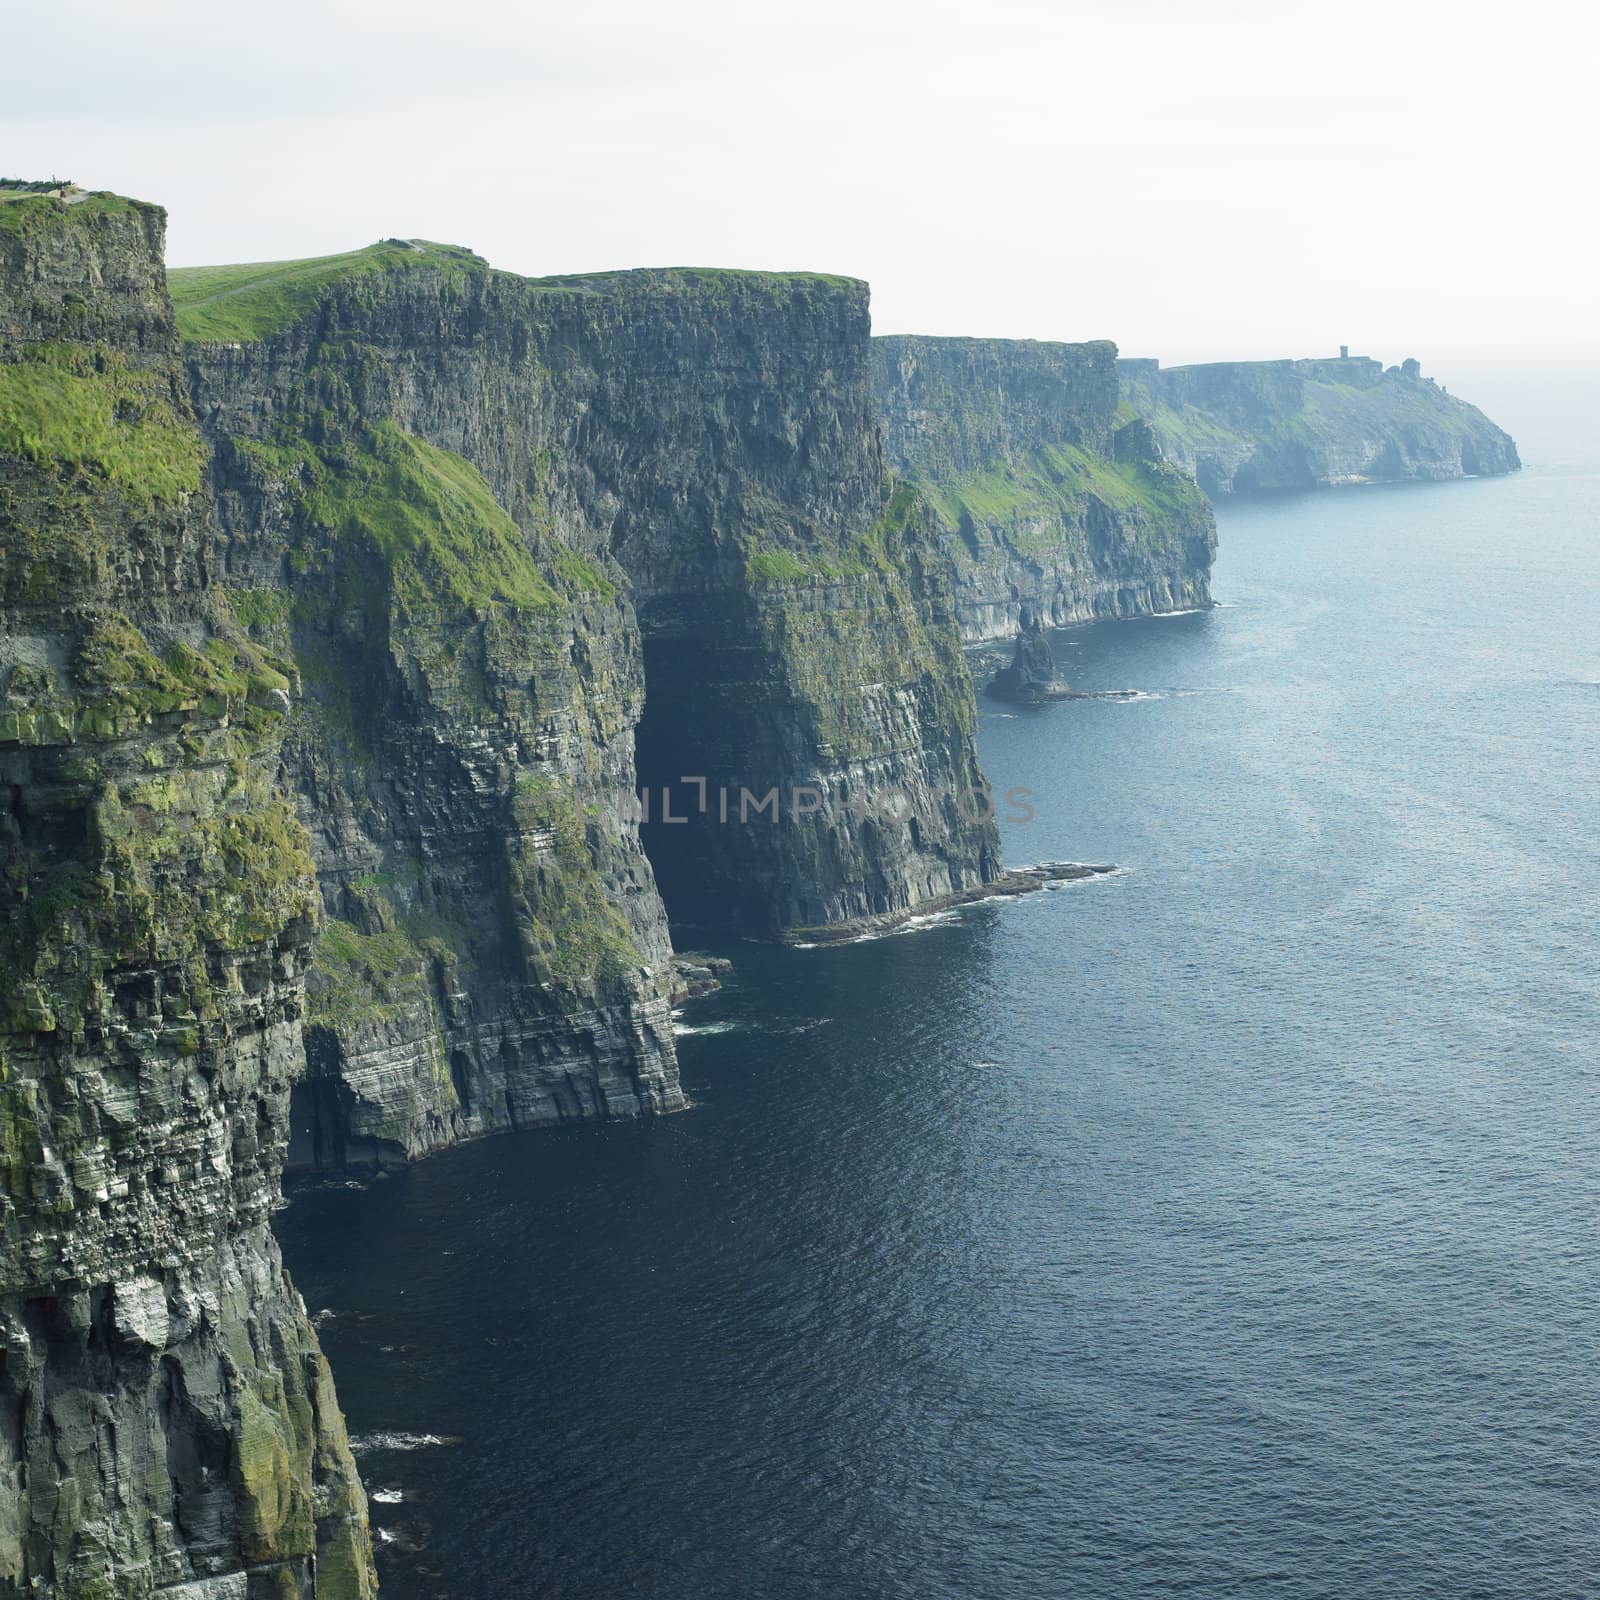 Cliffs of Moher, Burren, County Clare, Ireland by phbcz